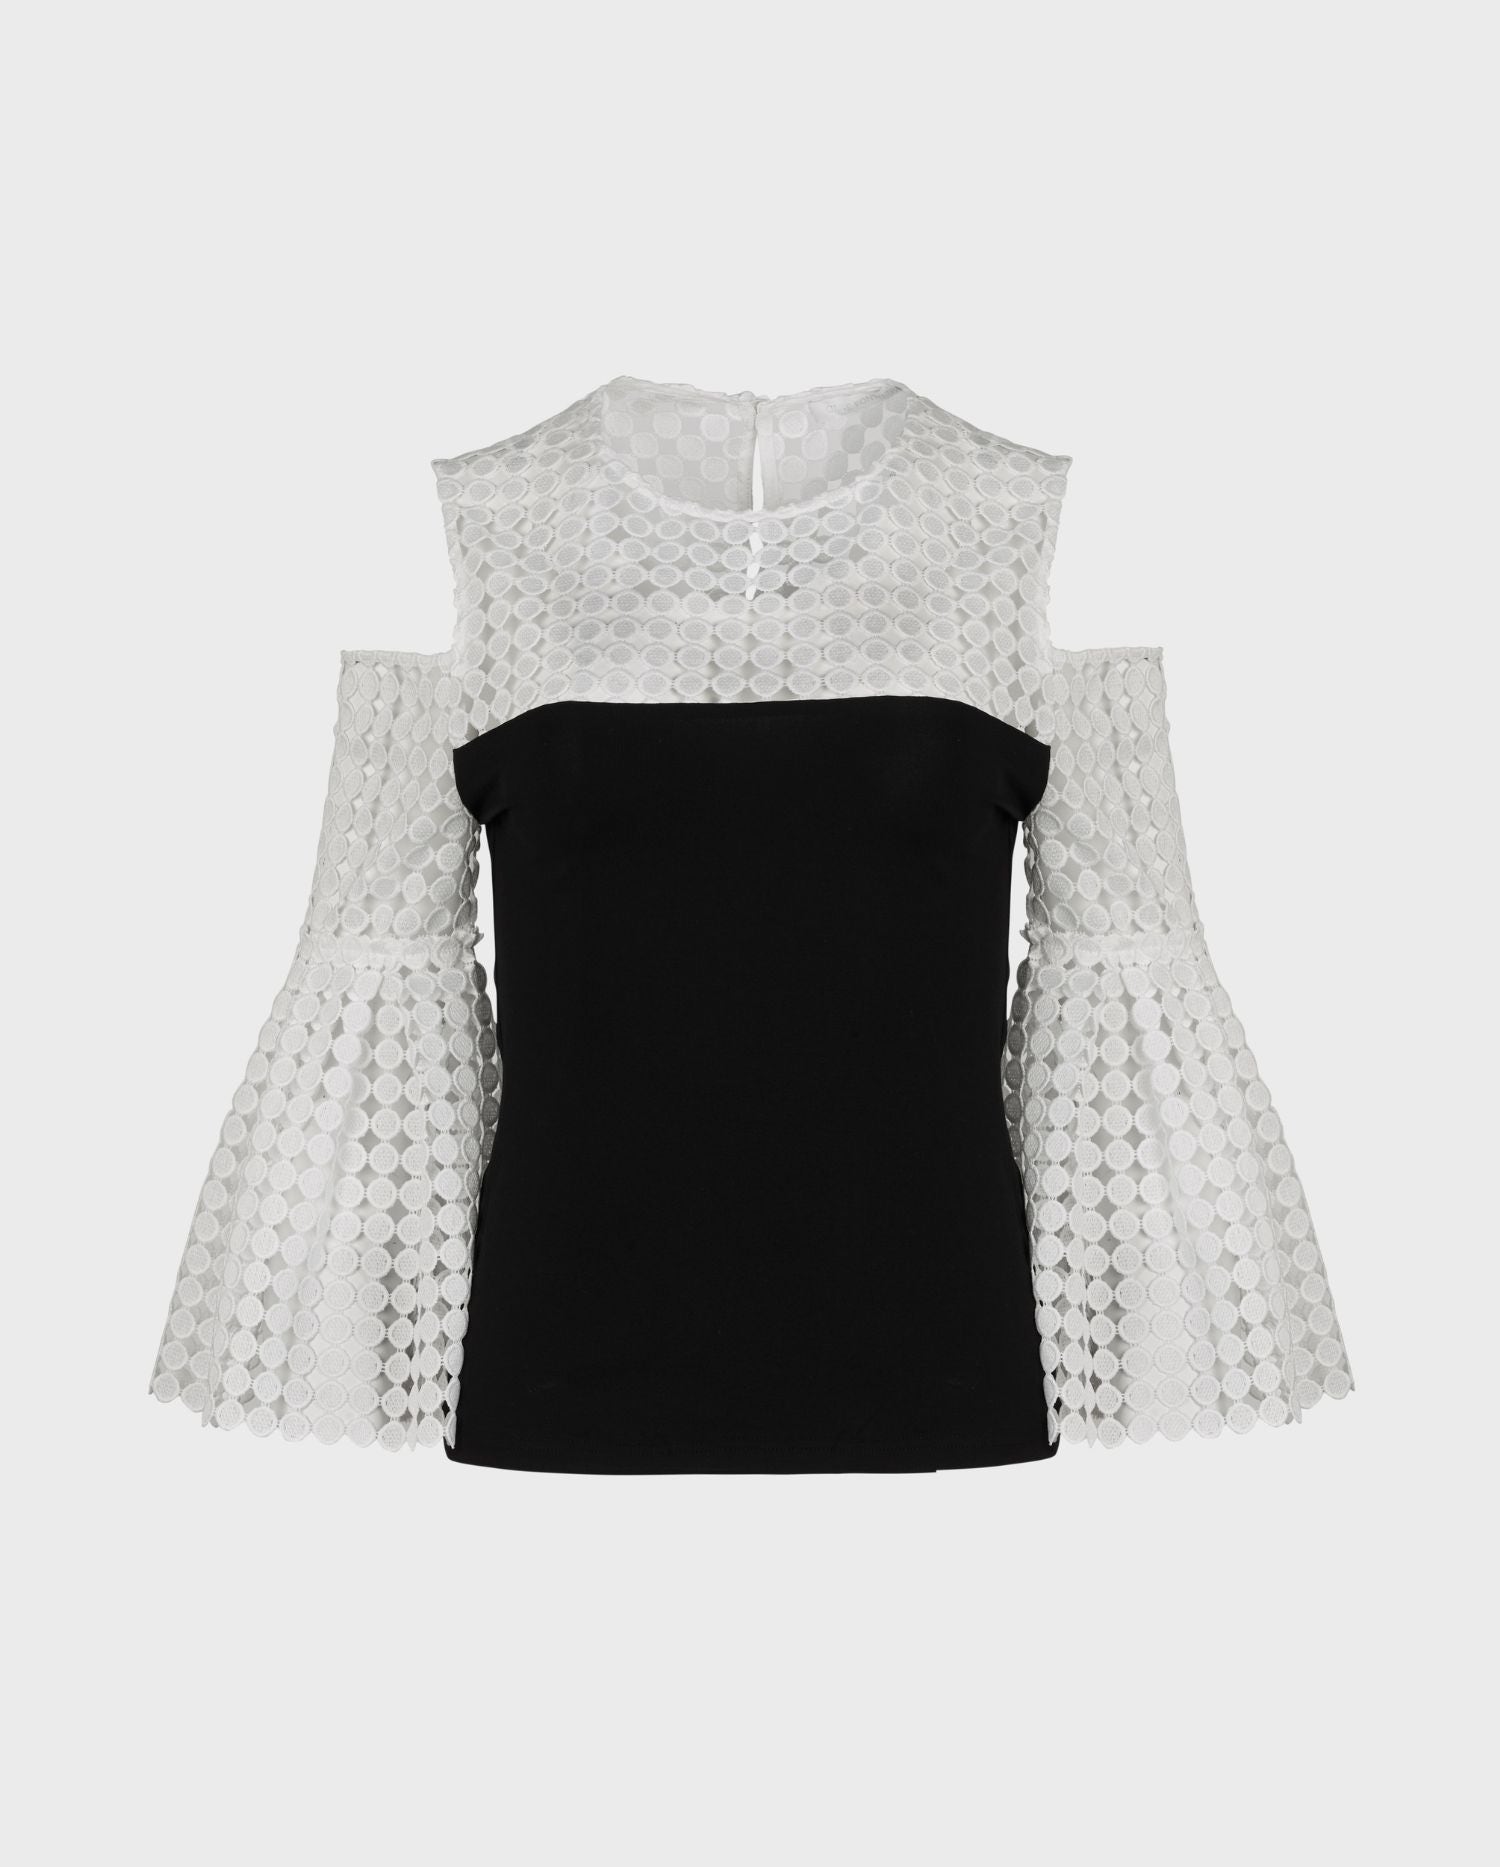 Discover the POTERIE Black and White Cold Shoulder Top With Geometric Cutouts from ANNE FONTAINE